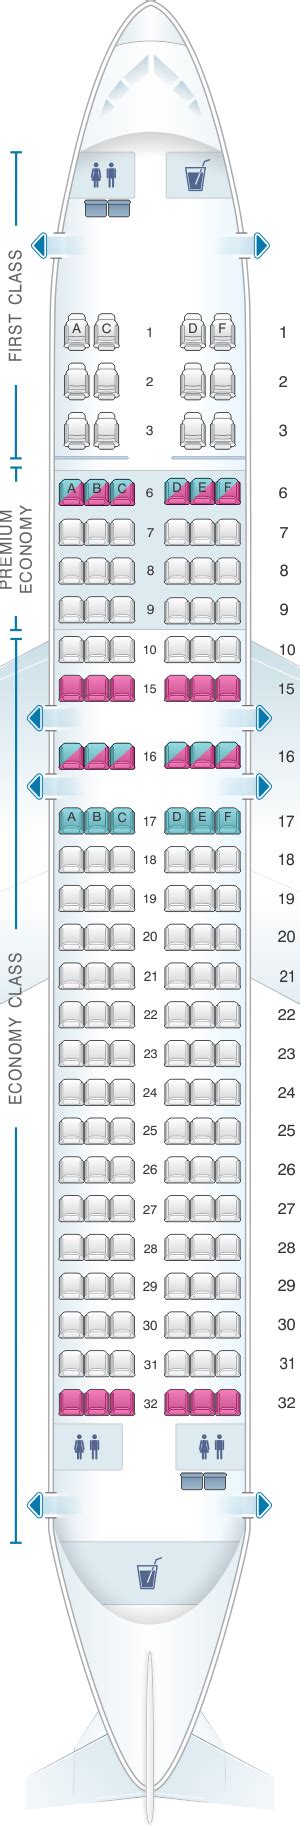 Airbus A Sharklets Seating Map Image To U